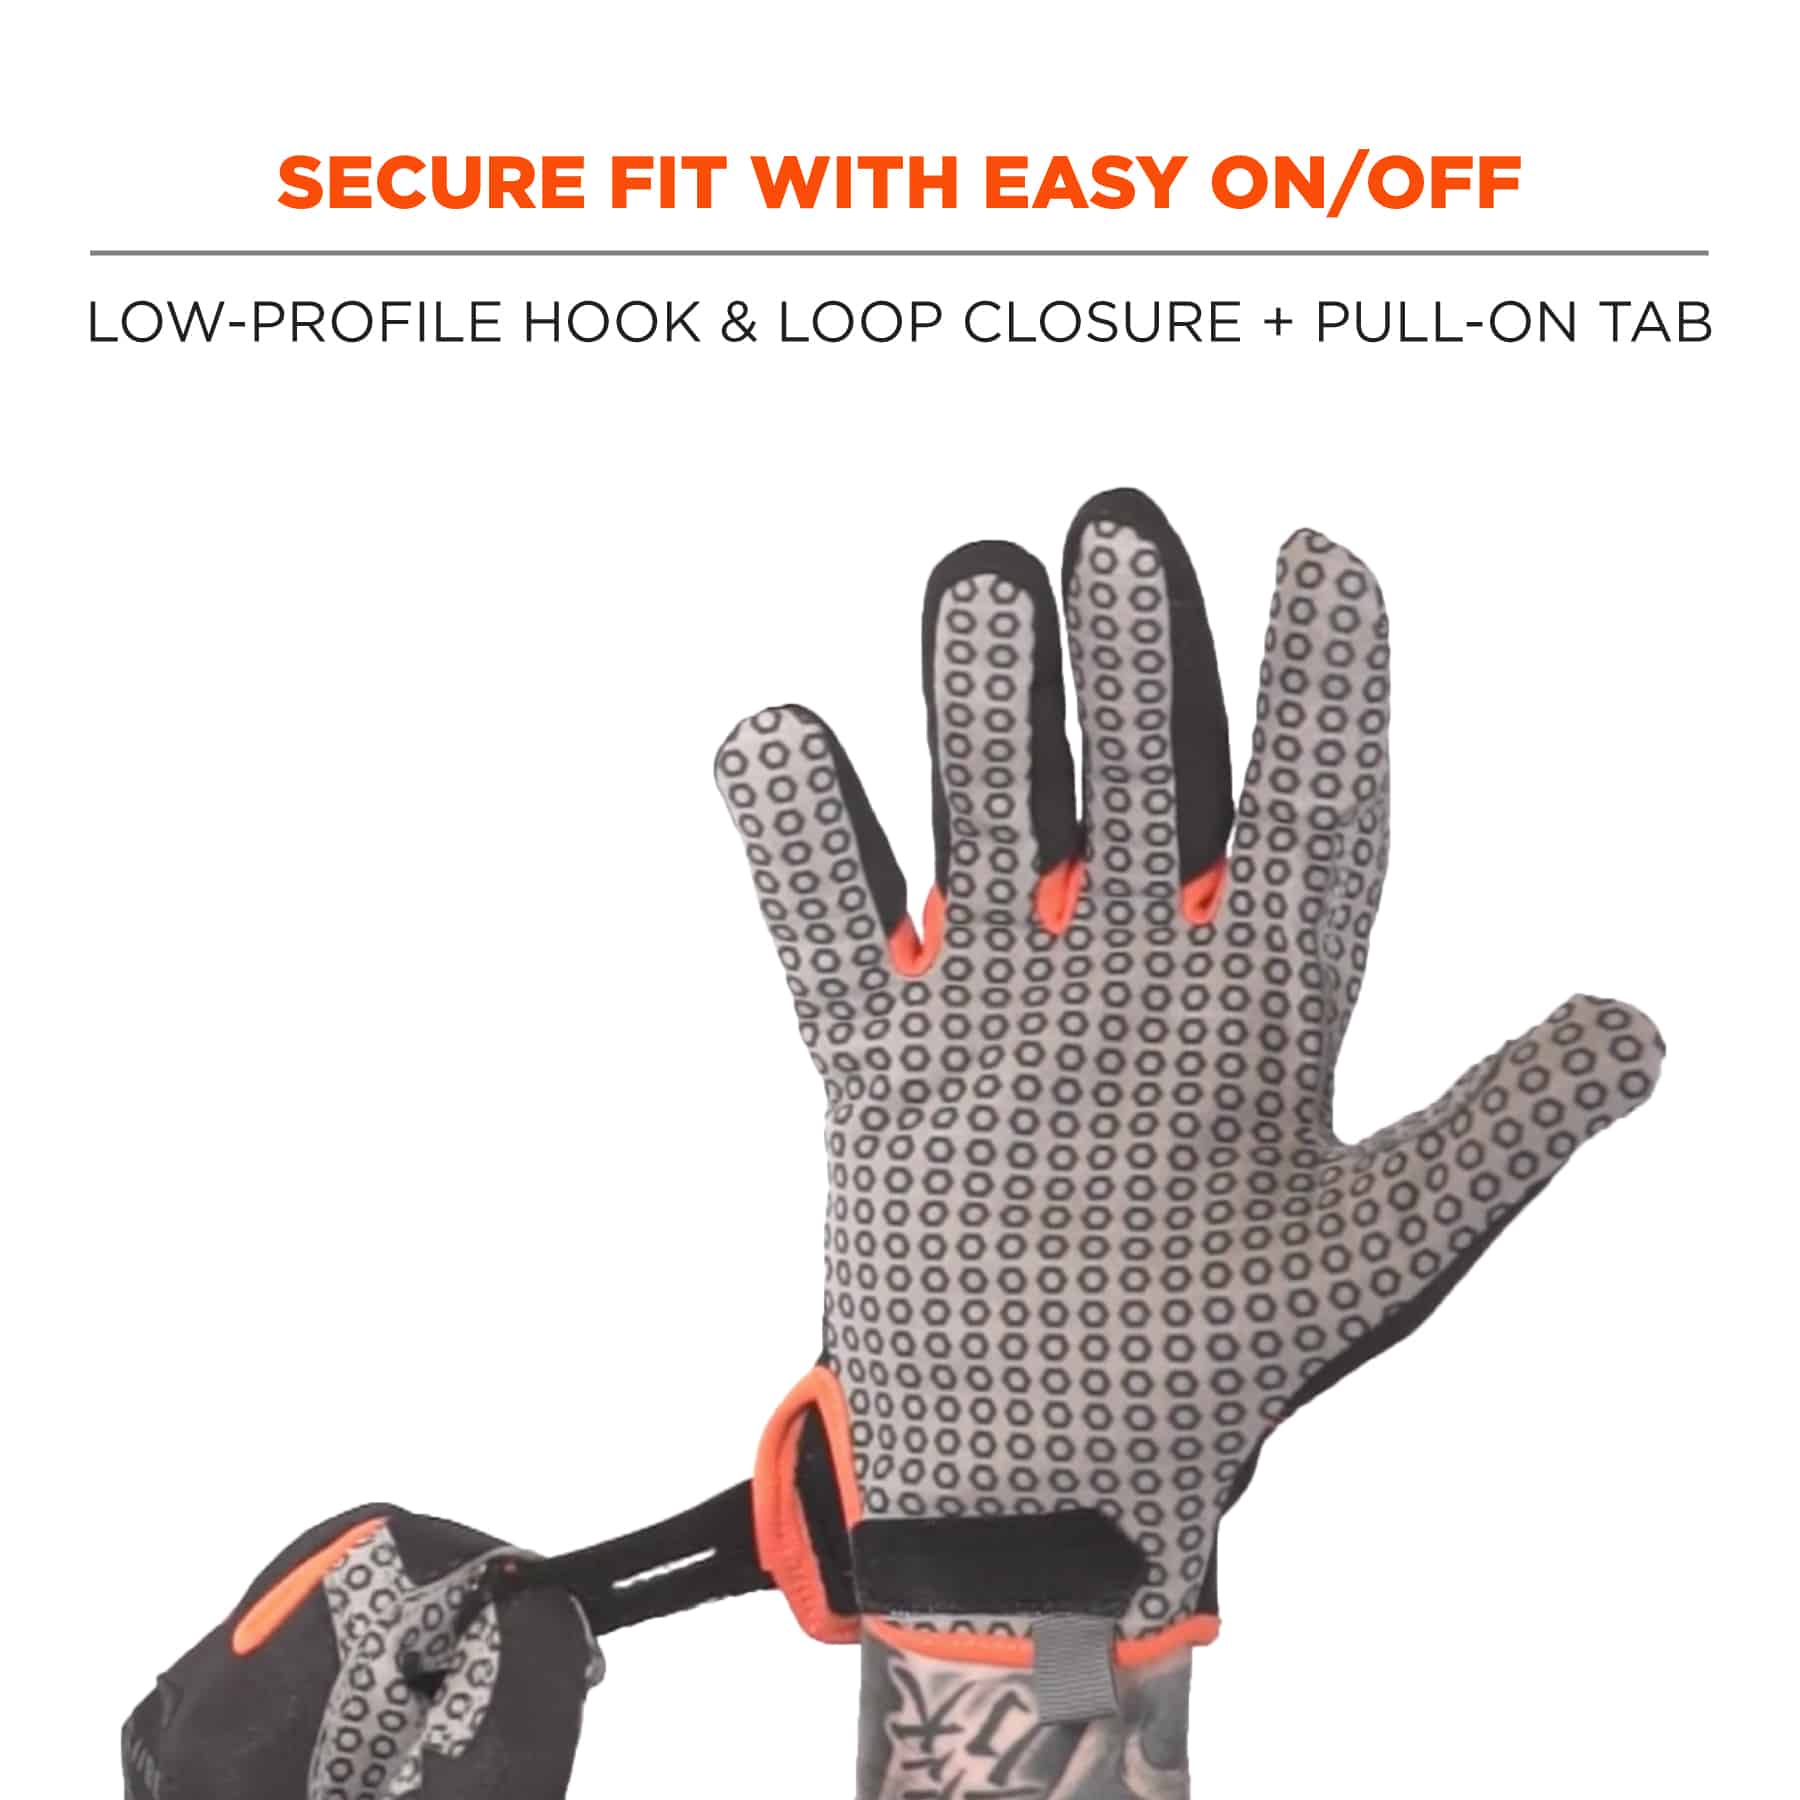 https://www.ergodyne.com/sites/default/files/product-images/17232-821-smooth-surface-handling-work-gloves-secure-fit-with-easy-on-off.jpg